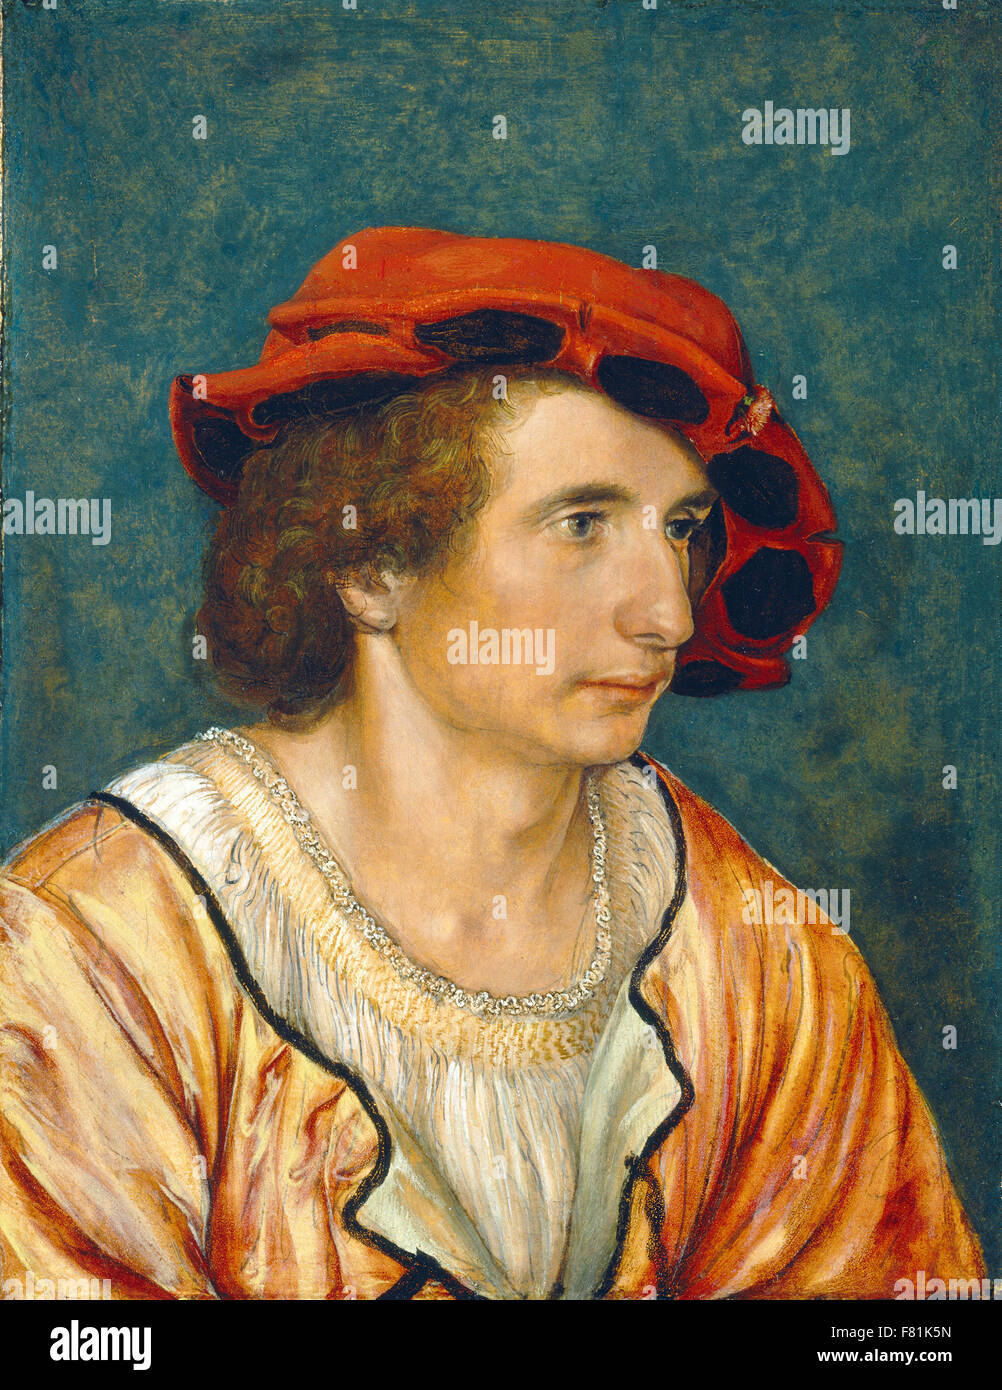 Hans Holbein the Younger - Portrait of a Young Man Stock Photo